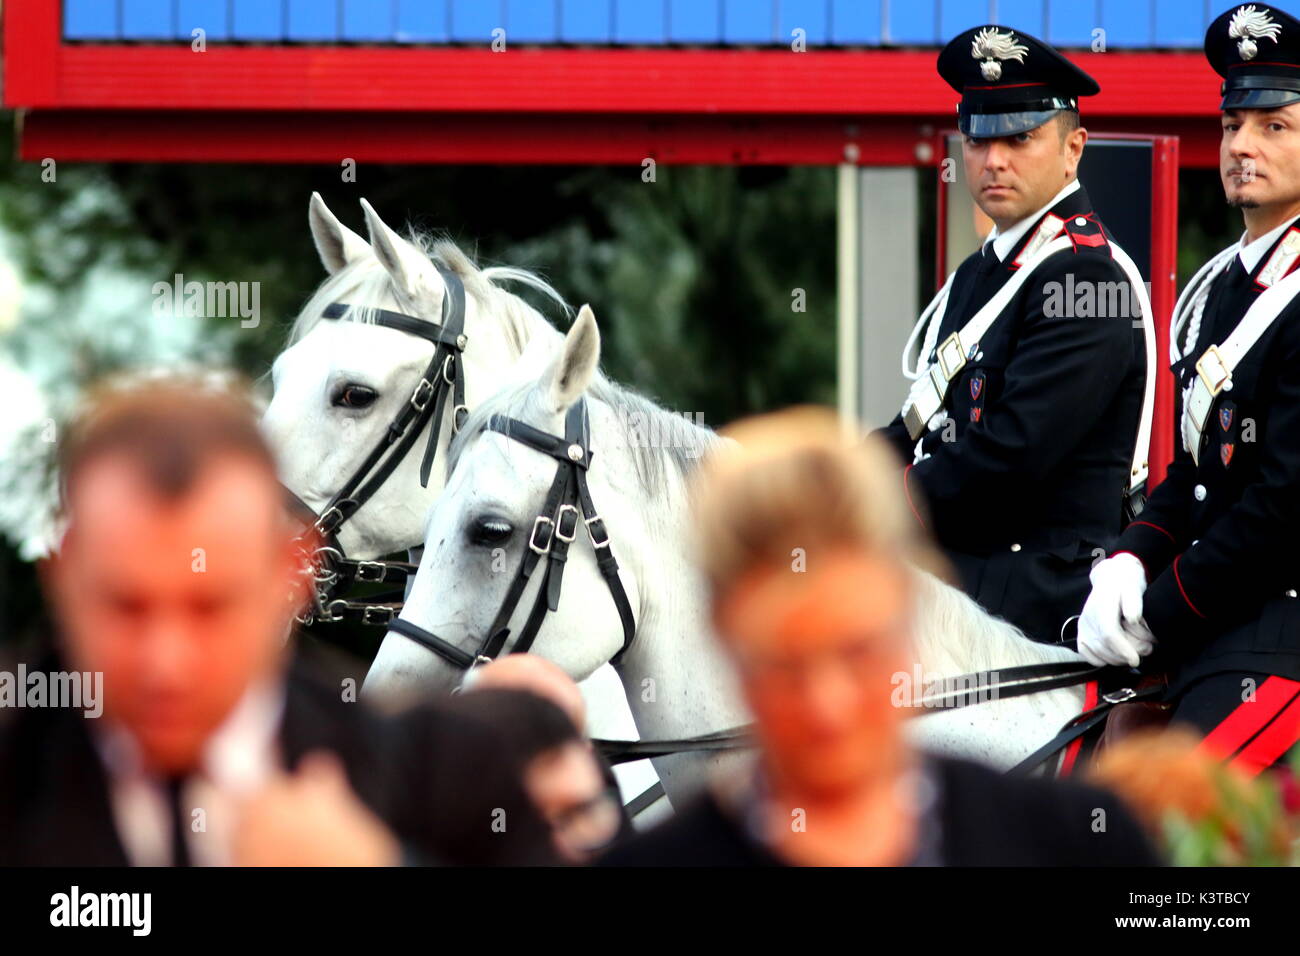 Venice, Italy. 3rd Sep, 2017. Italian Carabinieri with horses passes in front of Palazzo del Cinema during the 'The Leisure Seeker (Ella & John)' premiere during the 74th Venice International Film Festival at Lido of Venice on 3th September, 2017. Credit: Andrea Spinelli/Alamy Live News Stock Photo